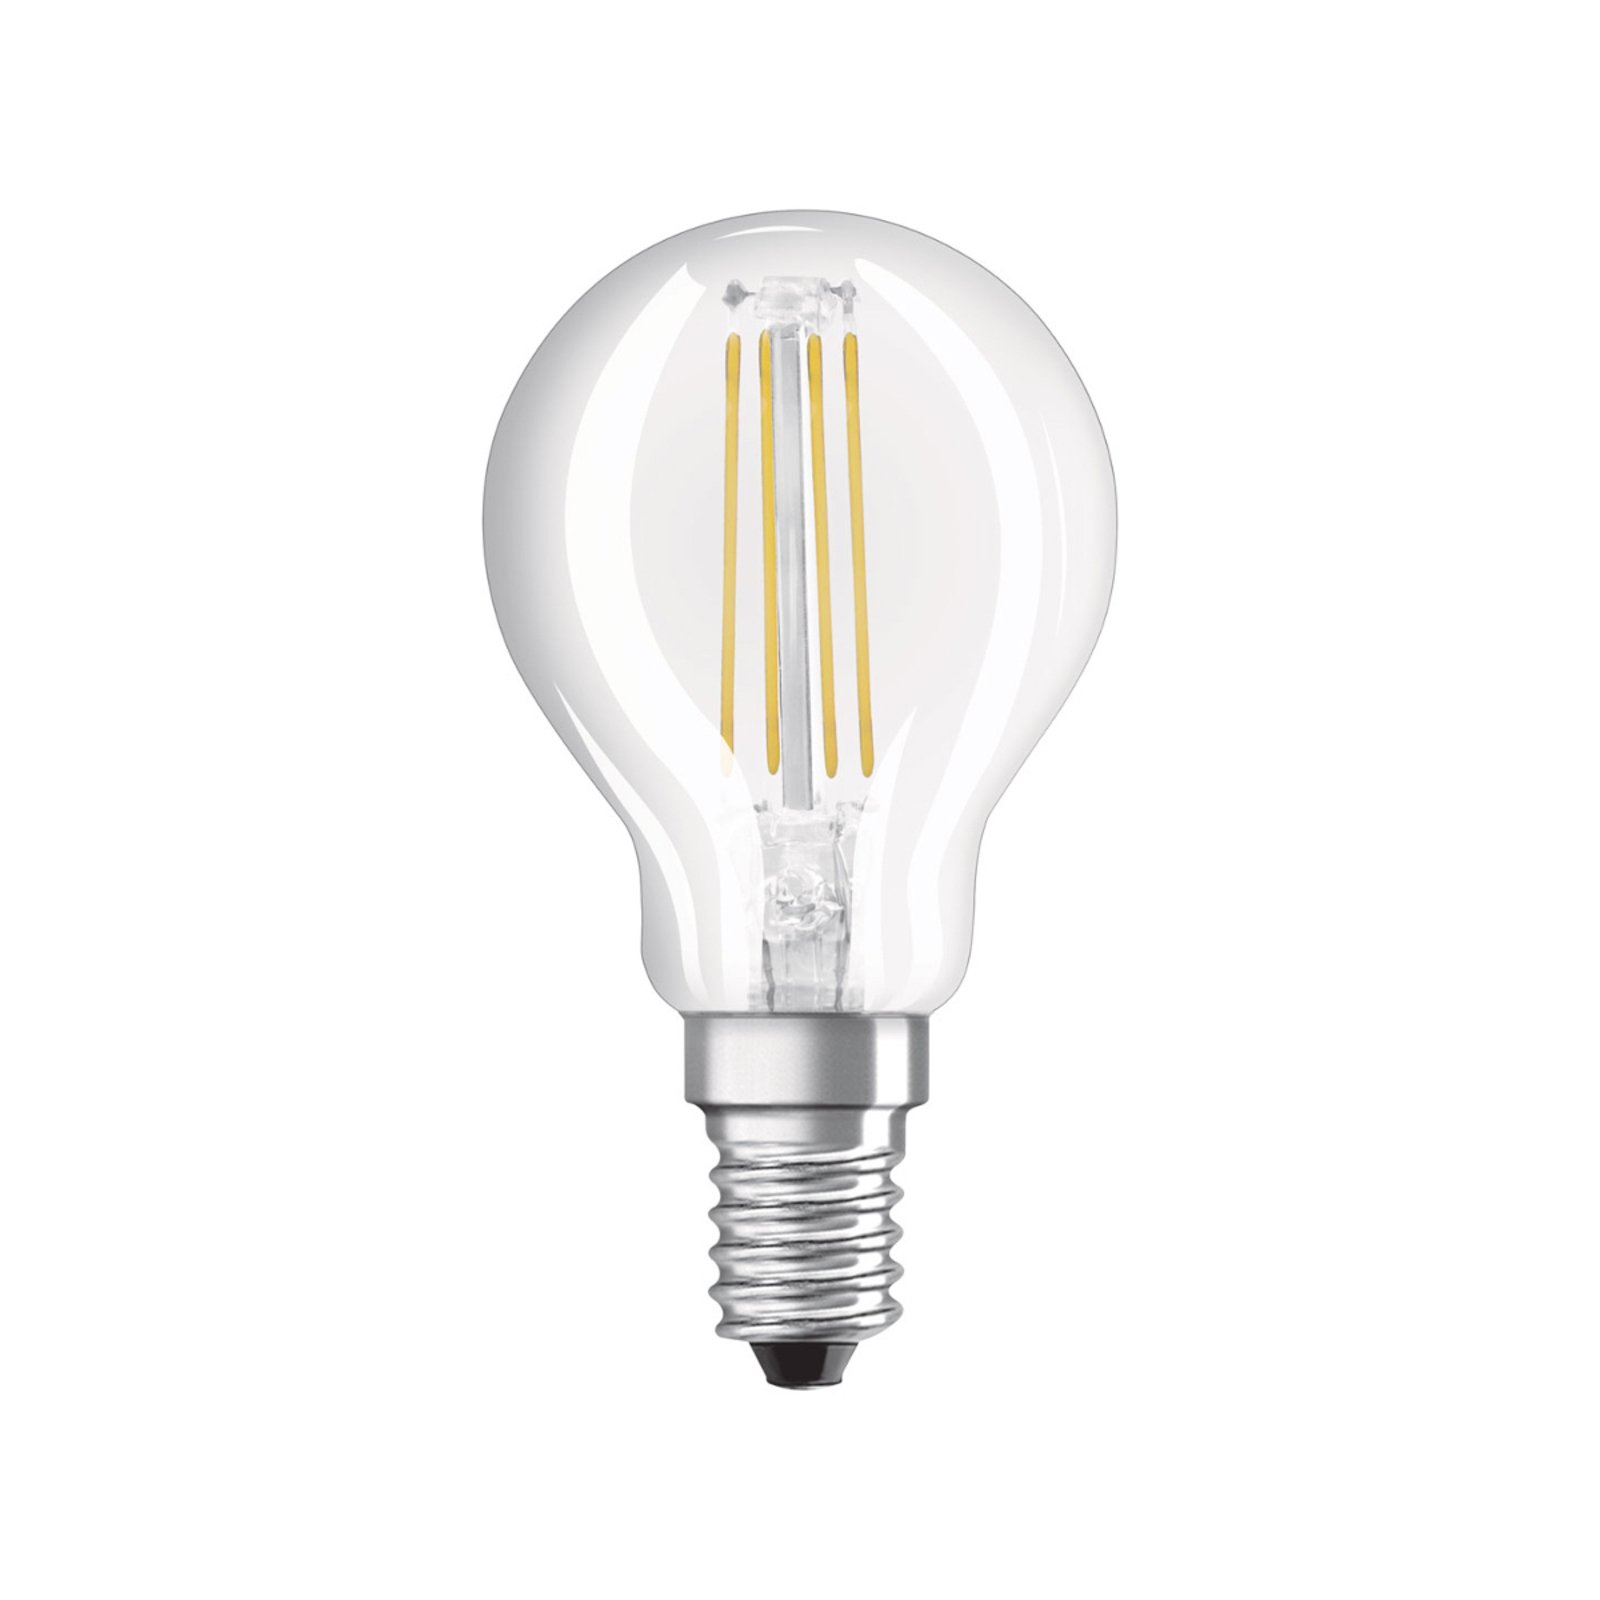 OSRAM goutte LED E14 4,8 W Superstar 840 dimmable